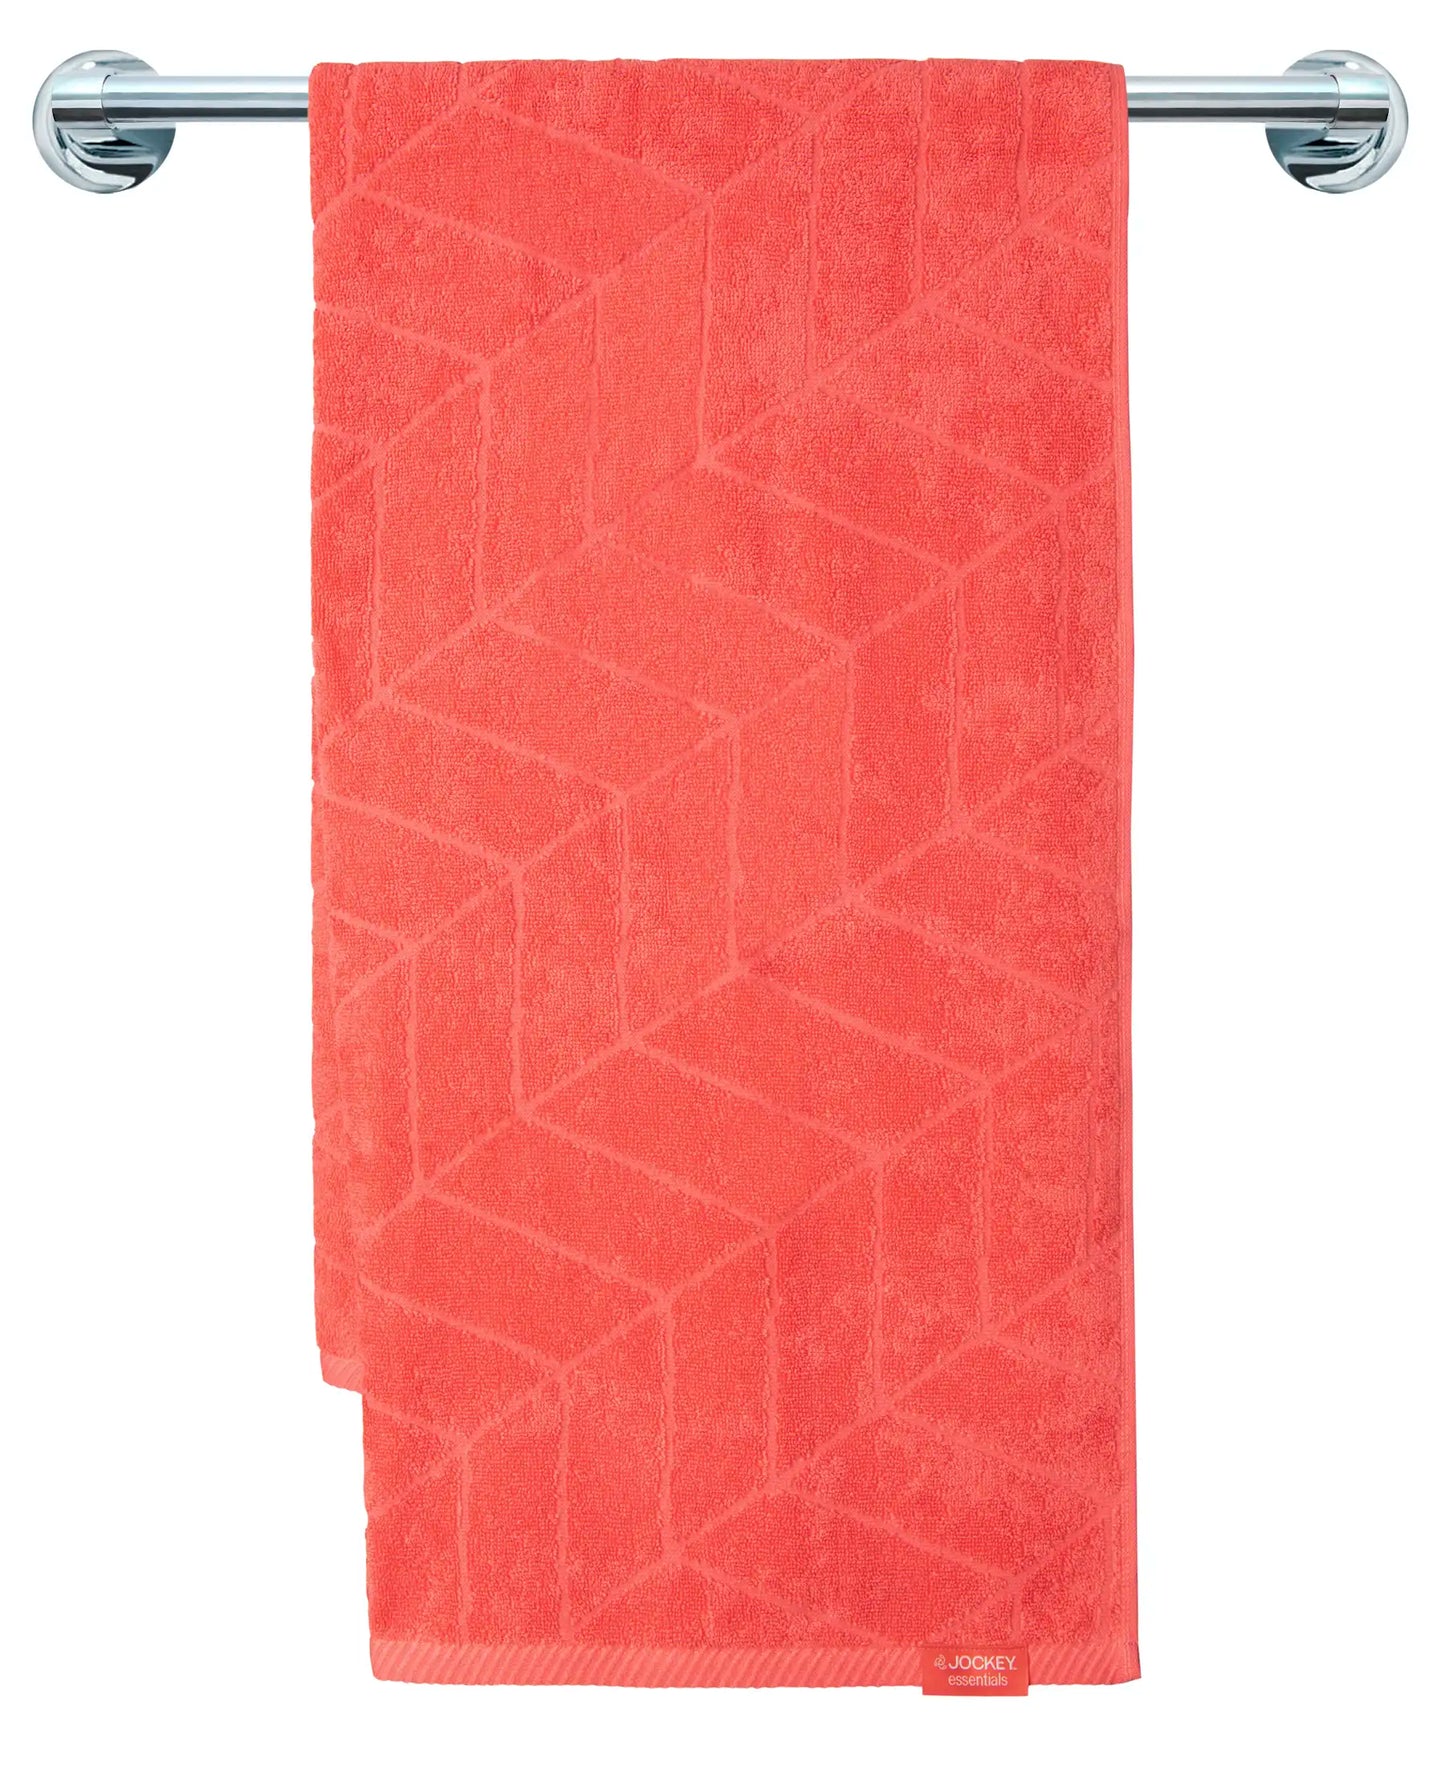 Cotton Terry Ultrasoft and Durable Patterned Bath Towel - Coral-3